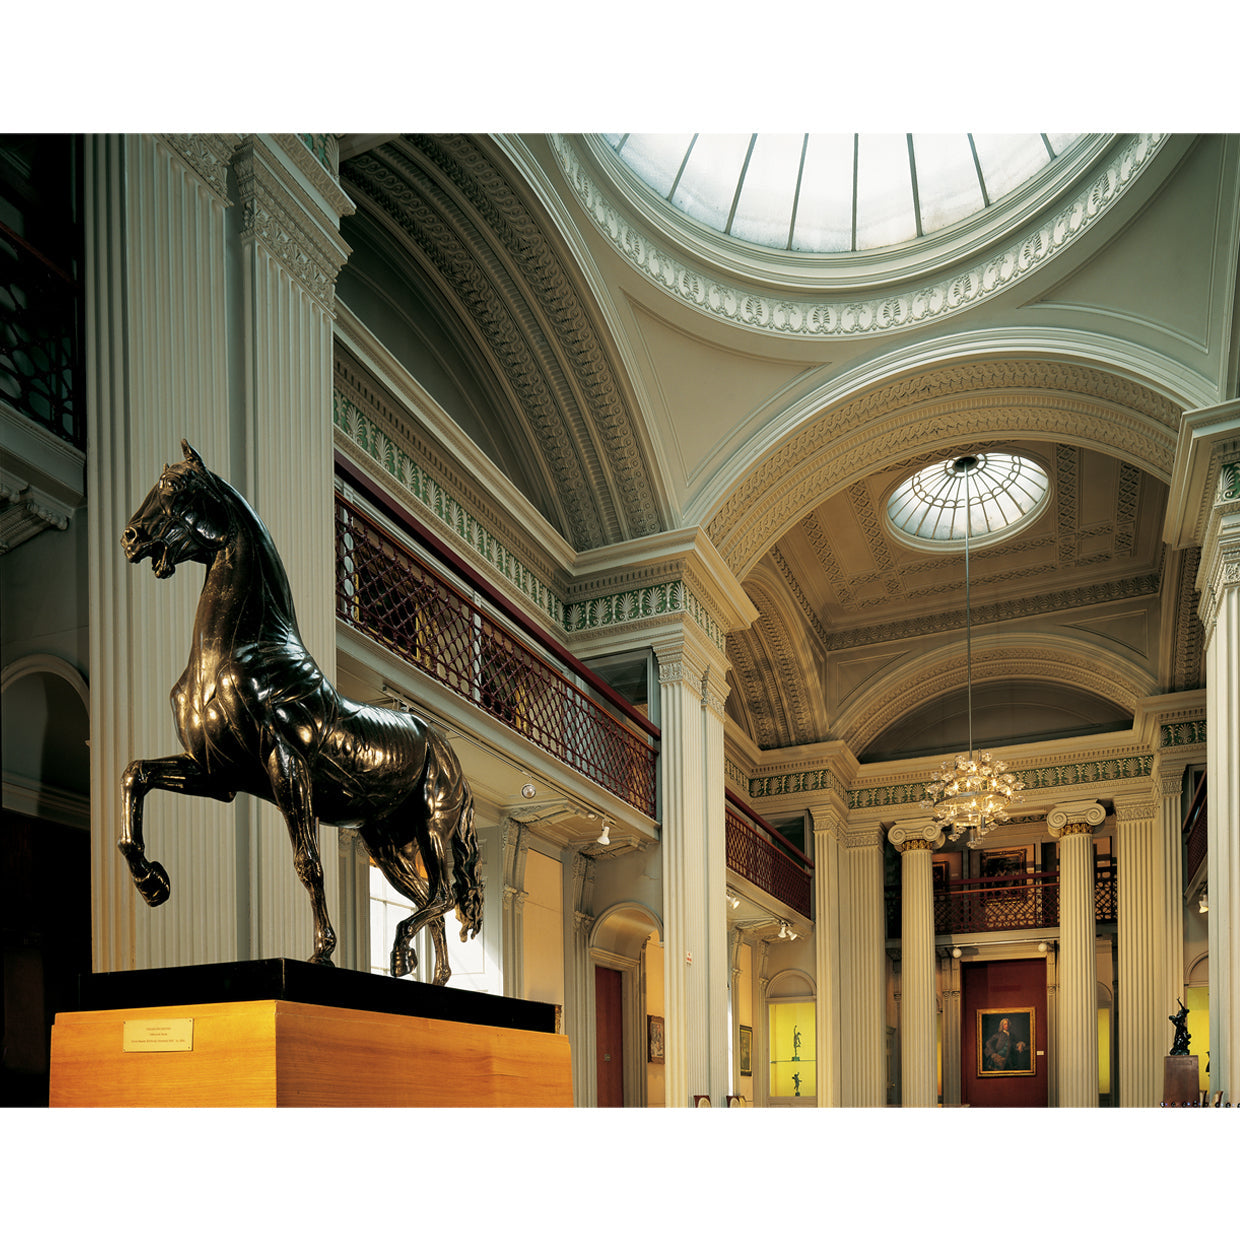 Photograph of the interior of the talbot rice gallery